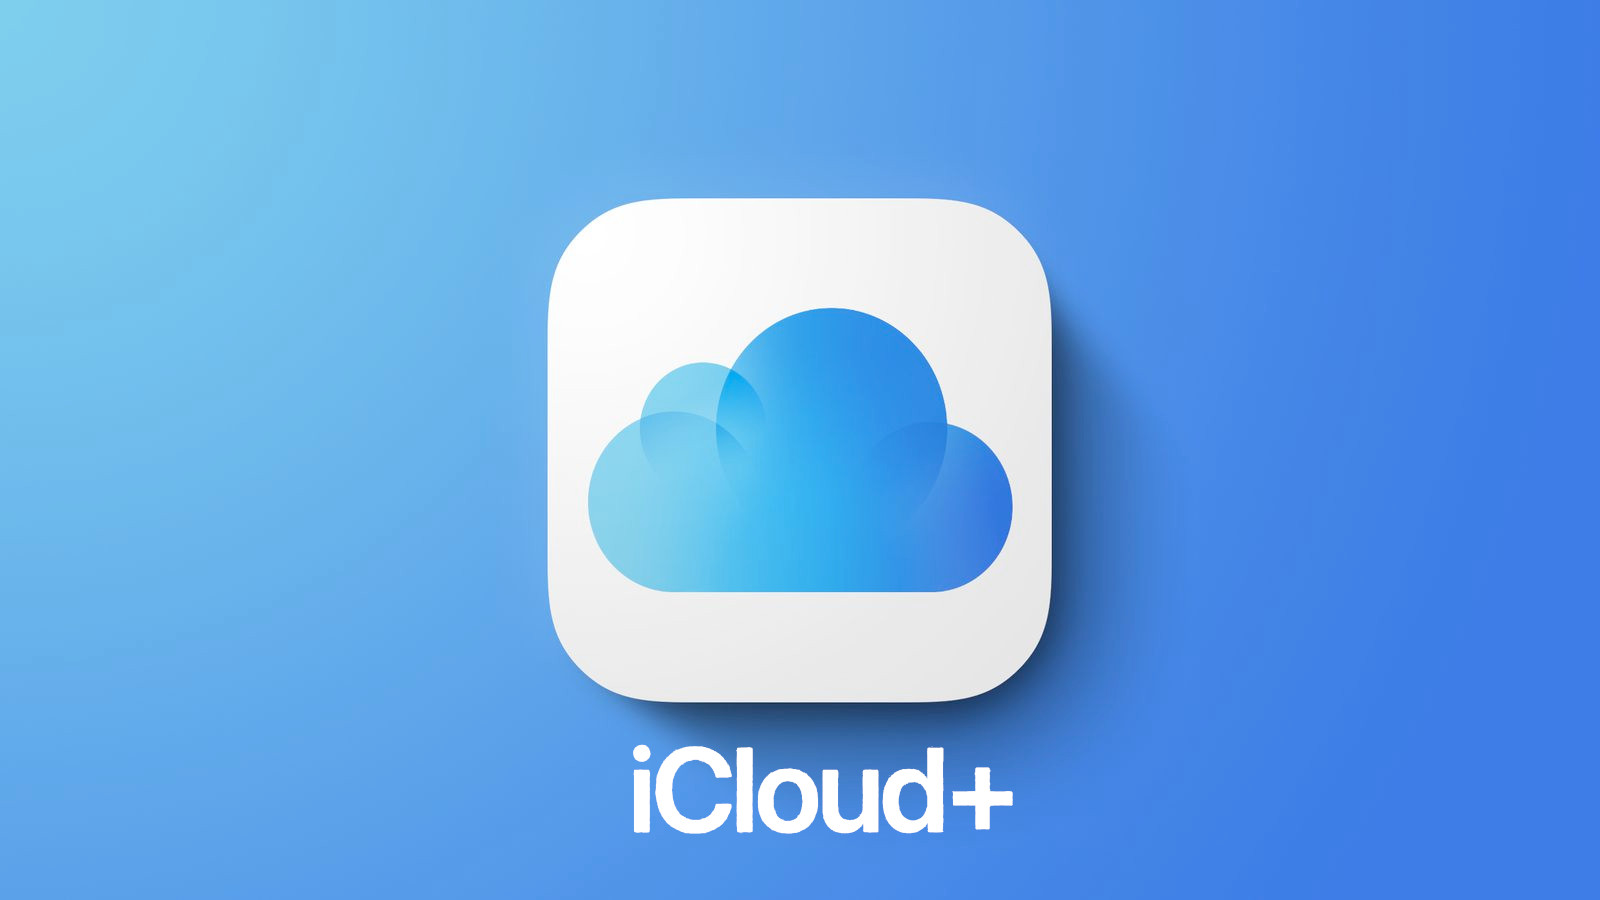 [$ 0.31] iCloud+ 50GB - 3 Months Trial Subscription US (ONLY FOR NEW ACCOUNTS)